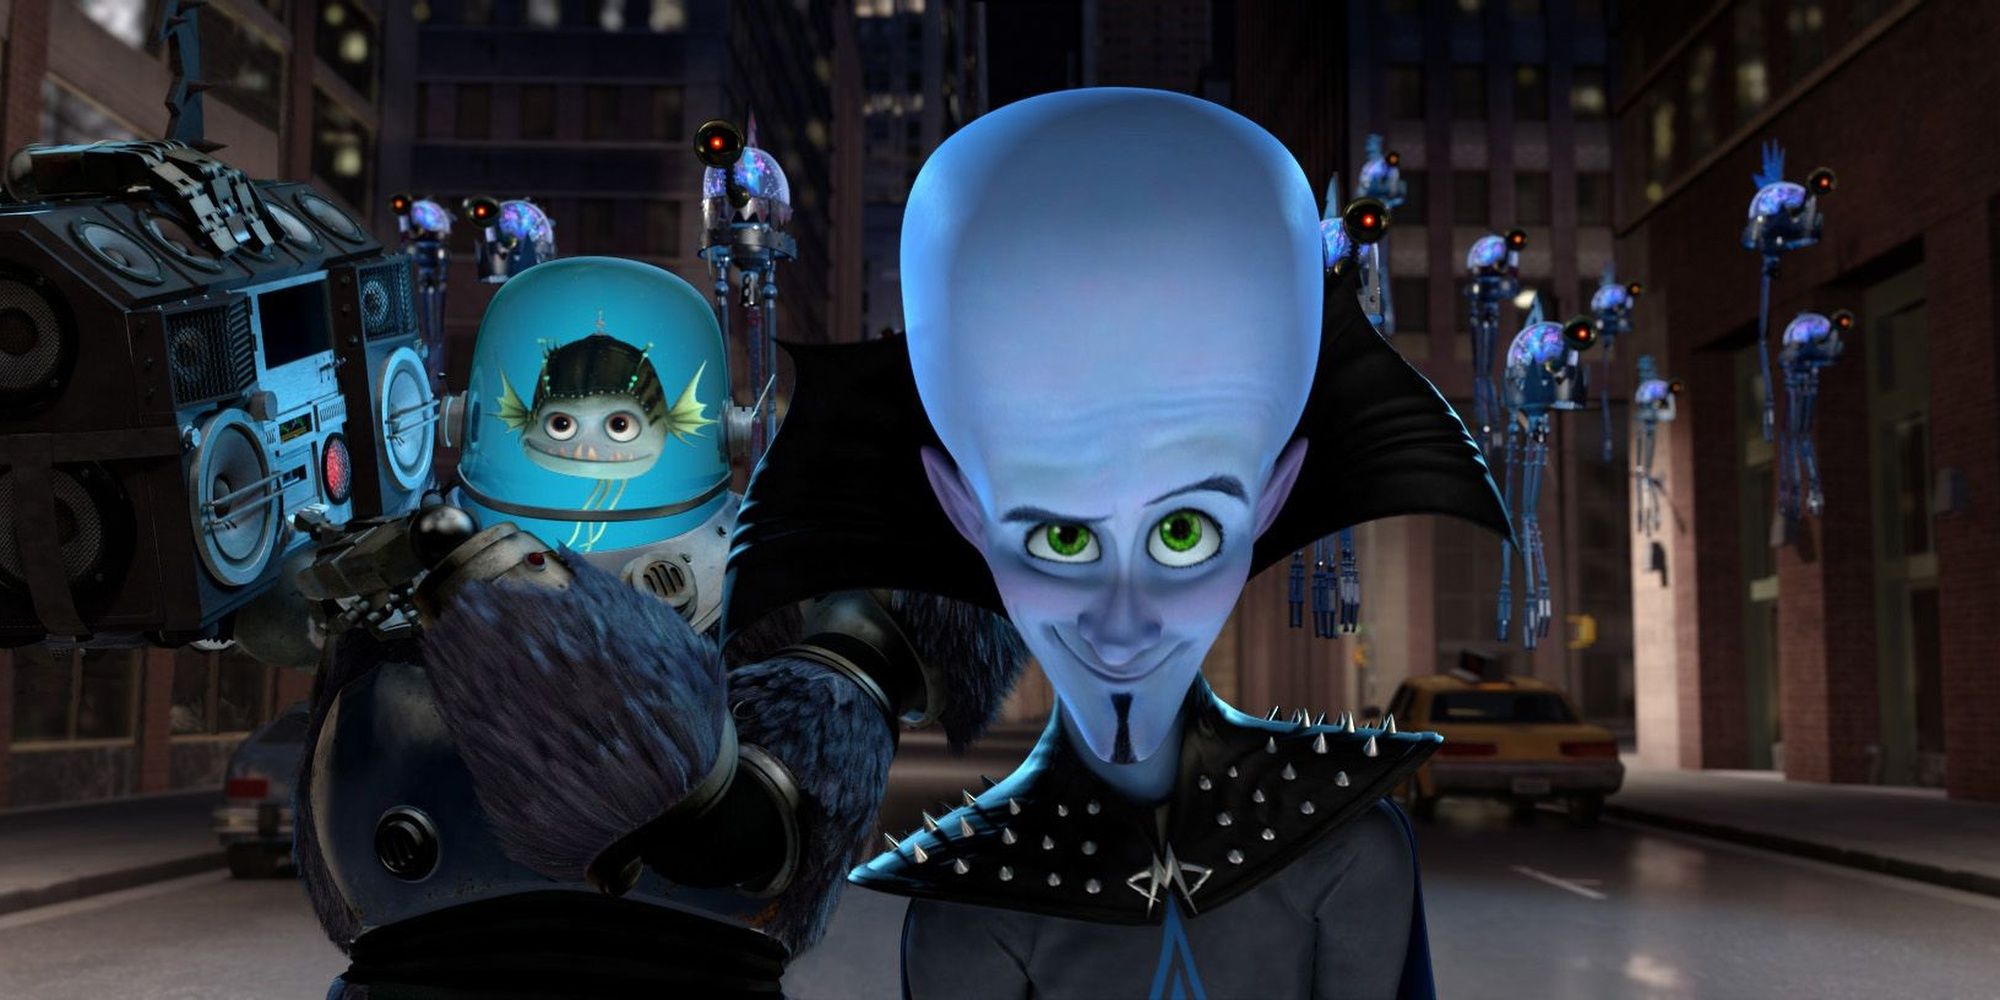 Megamind and Minion victory walking through the streets of Metro City.